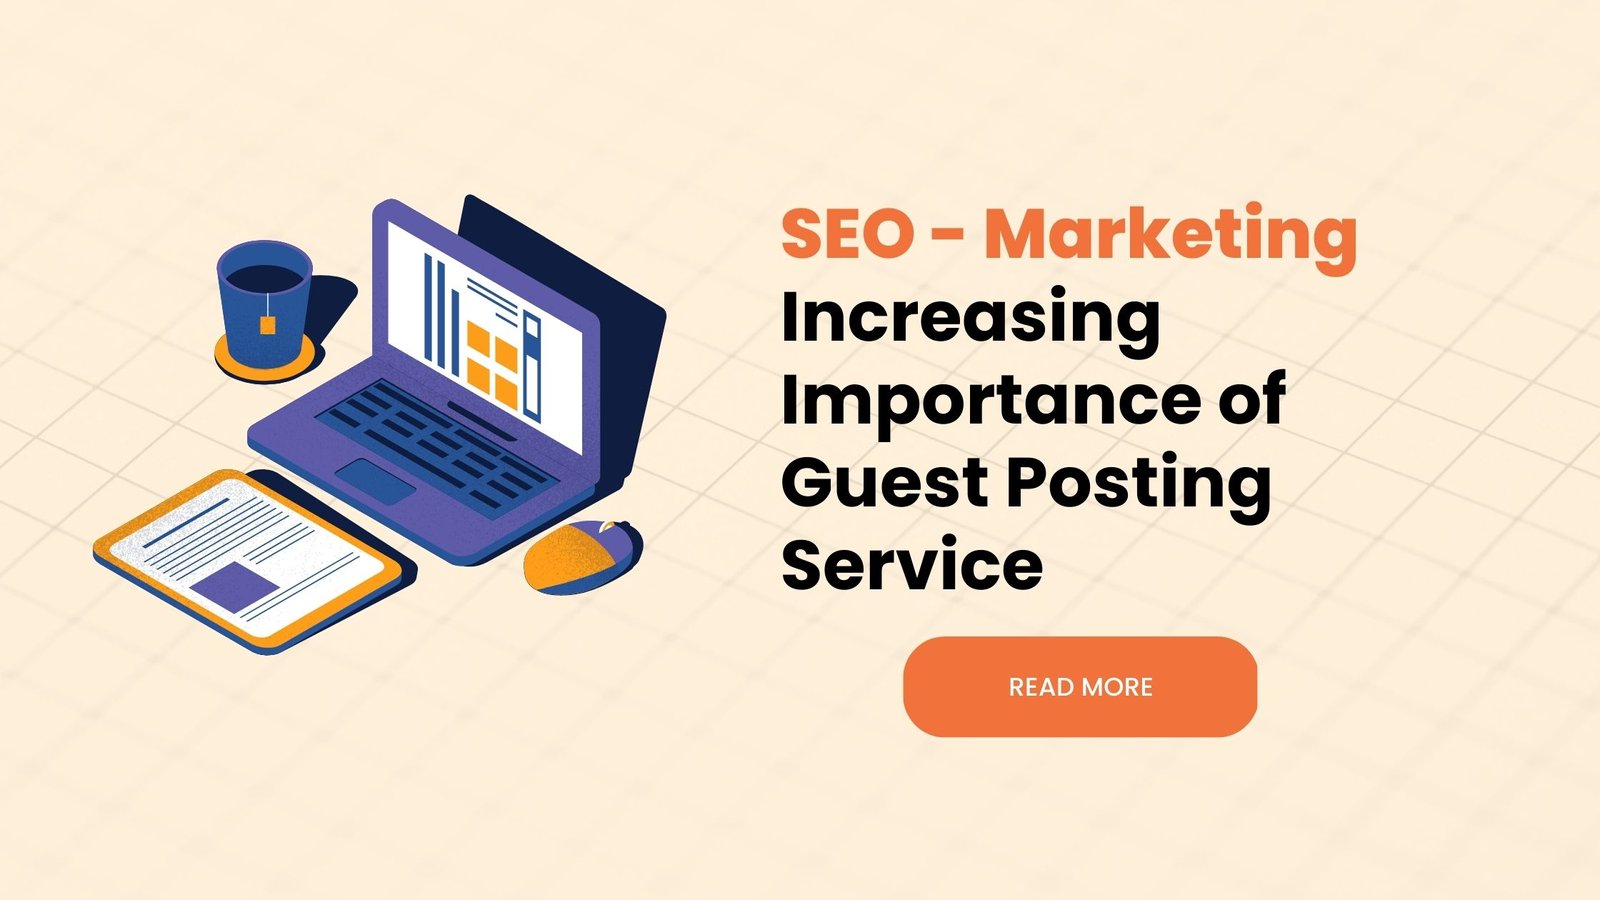 Increasing Importance of Guest Posting Service